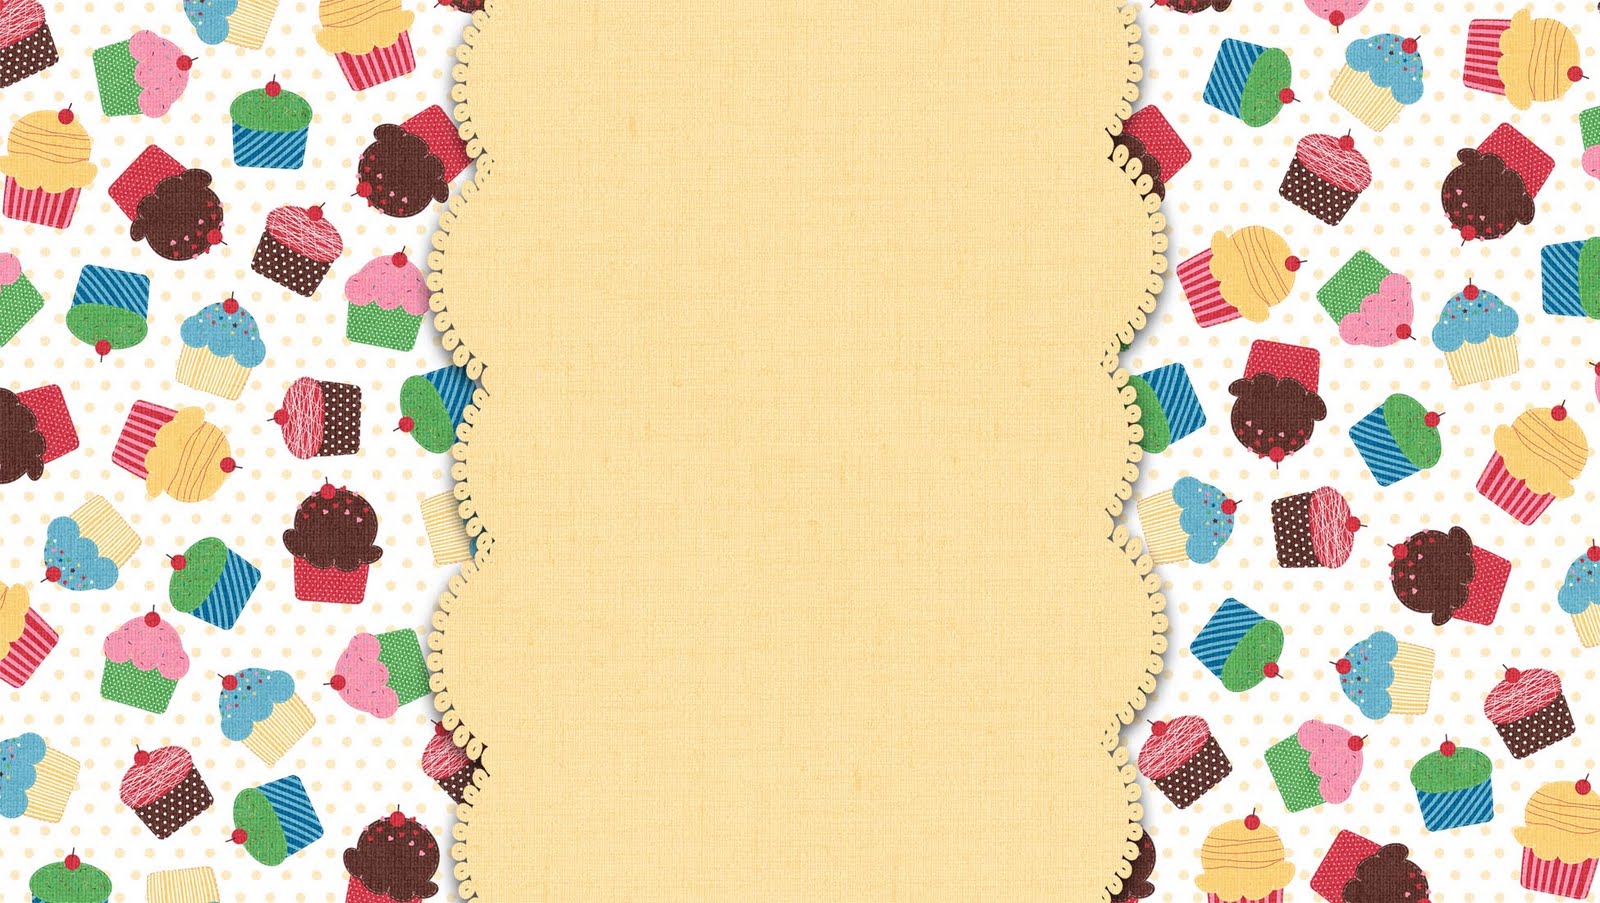 Cute Cupcake Background Image Amp Pictures Becuo